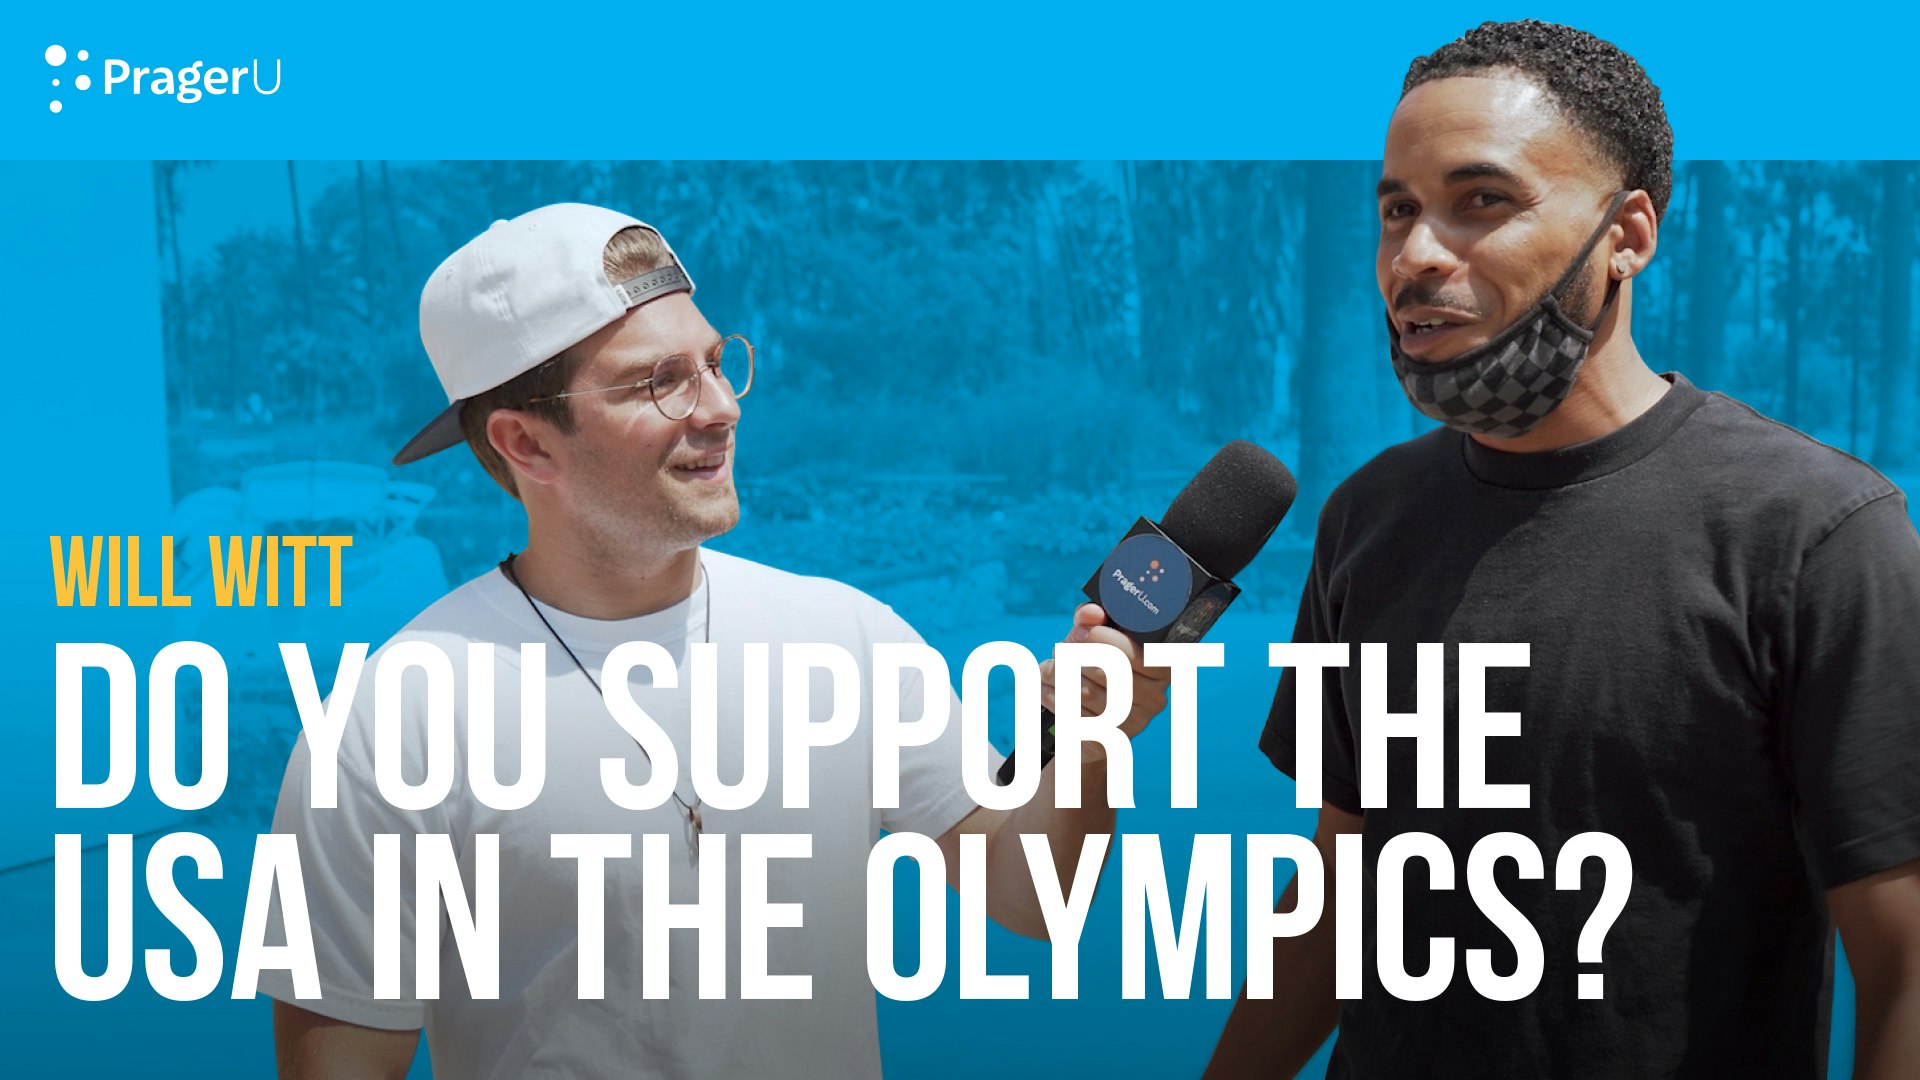 Do You Support the USA in the Olympics?